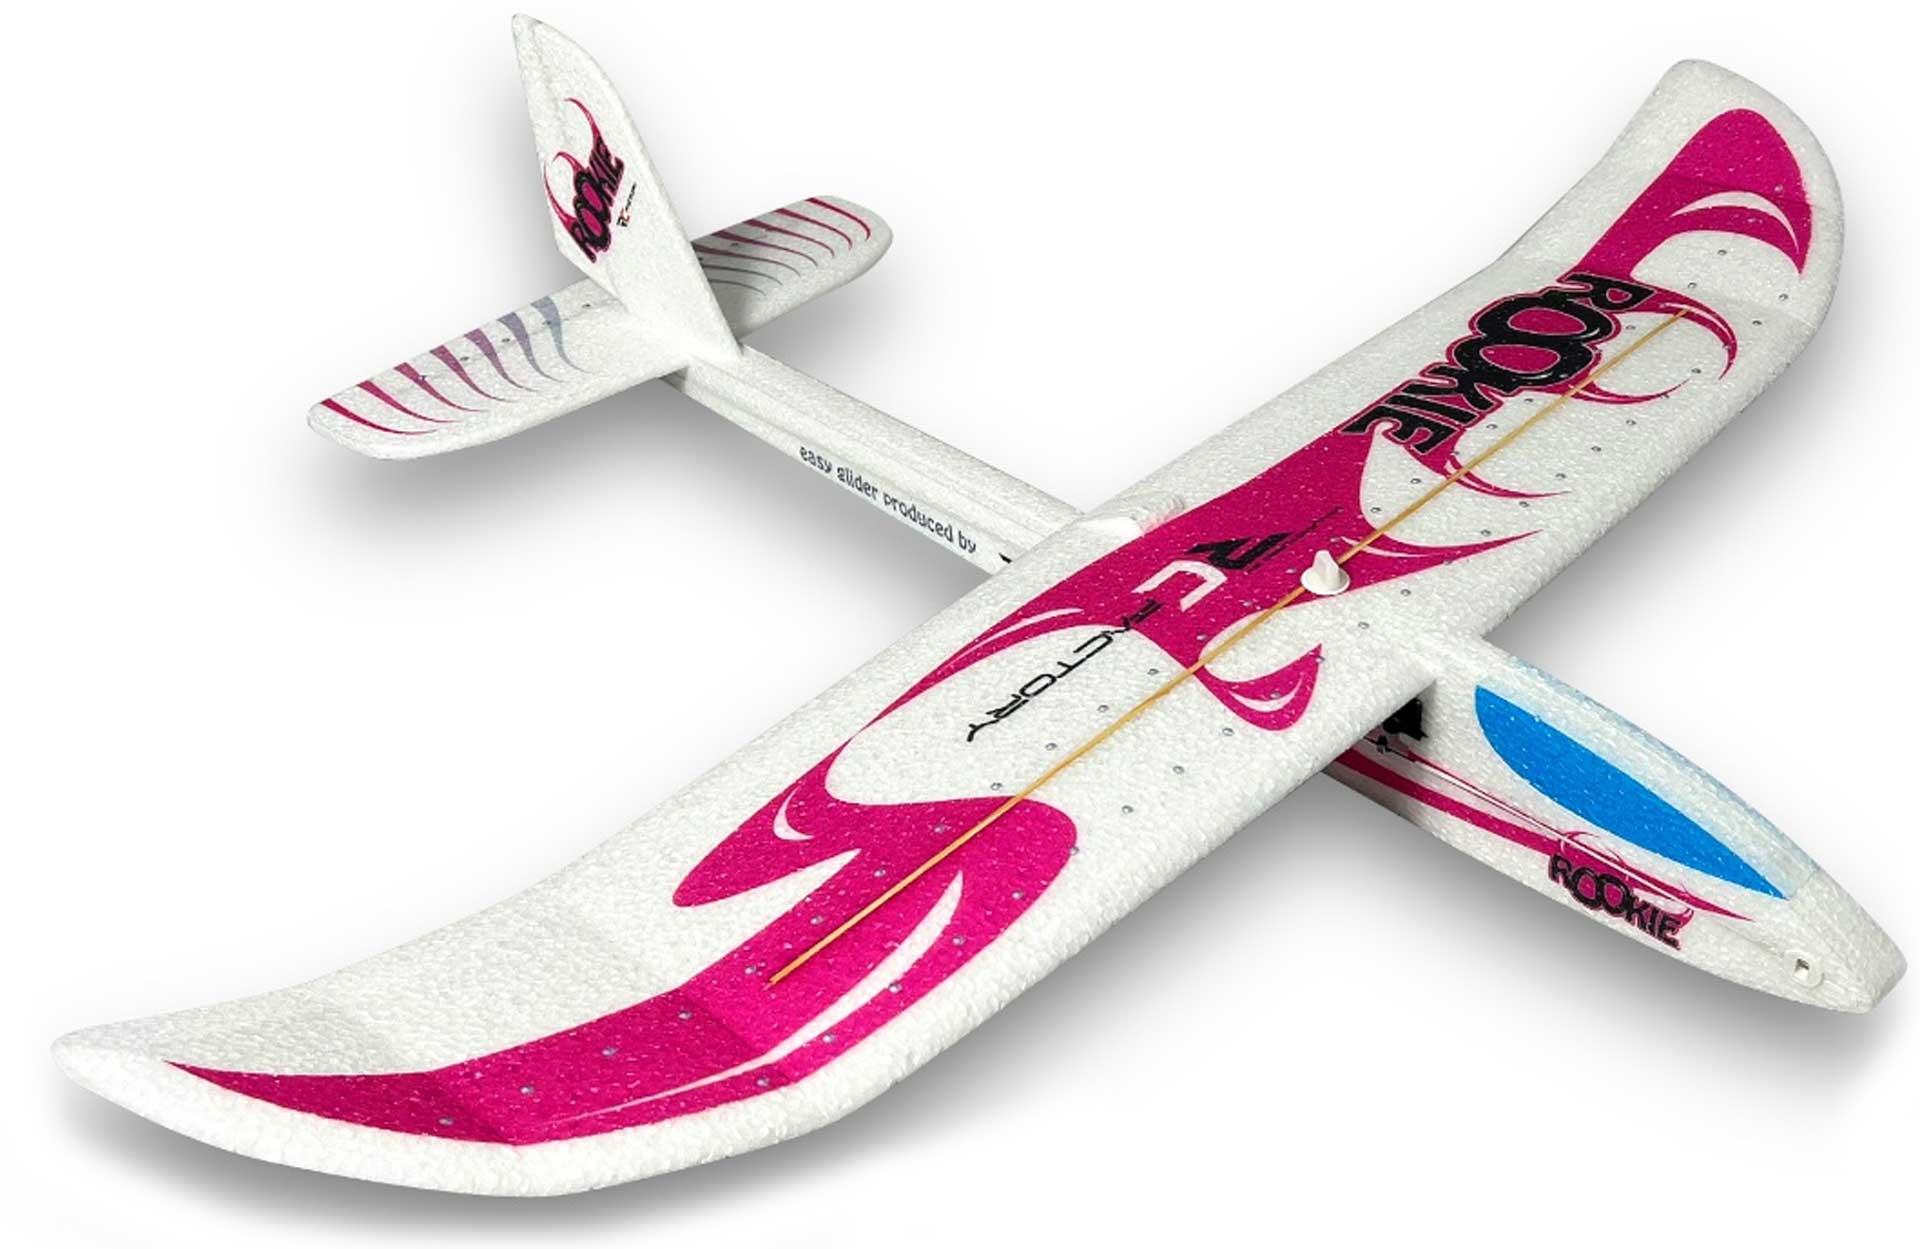 RC-Factory Rookie Pink hand gliders or R/C model